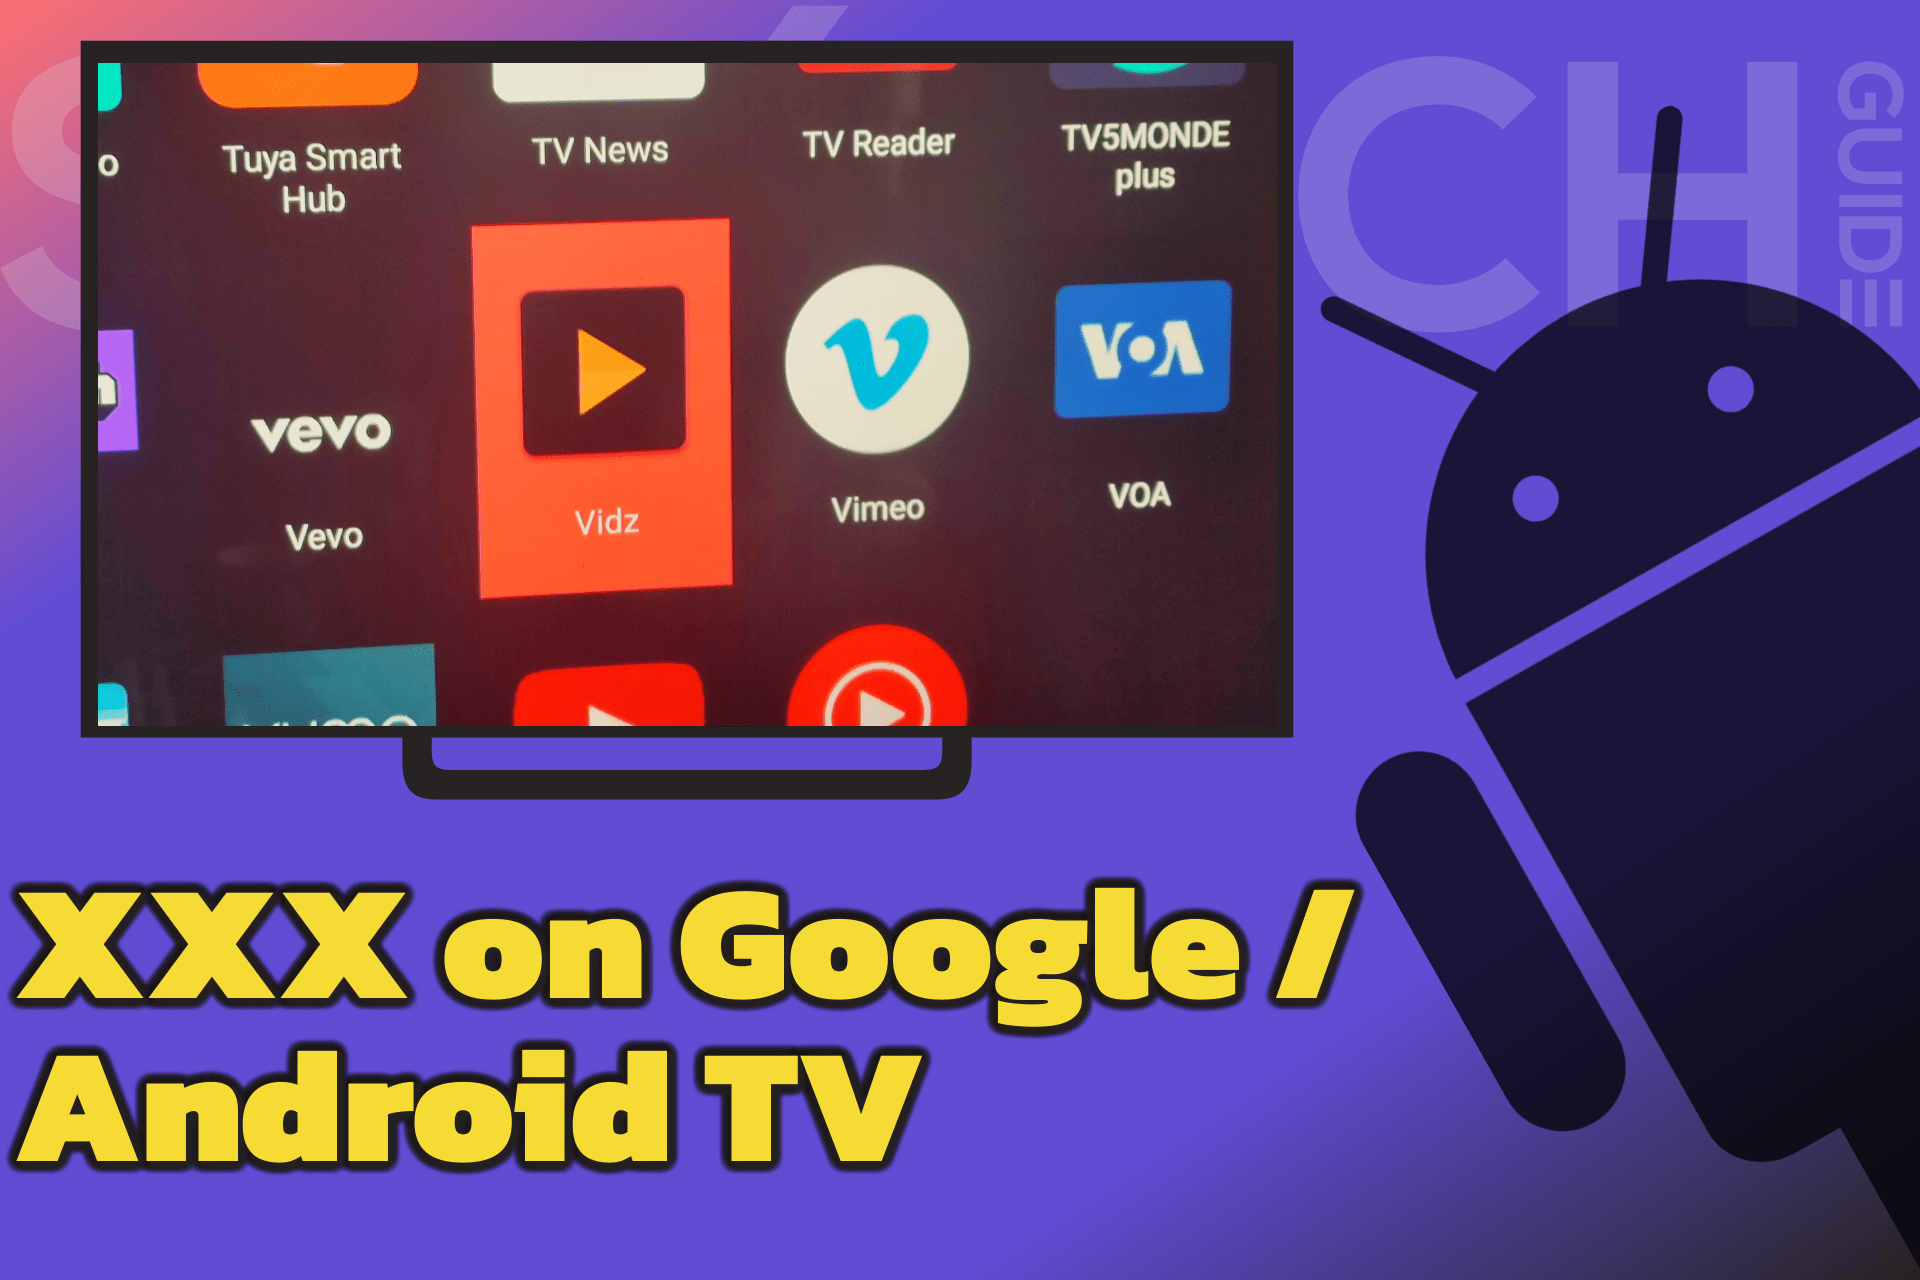 adrianne camacho recommends how to watch porn on android tv pic